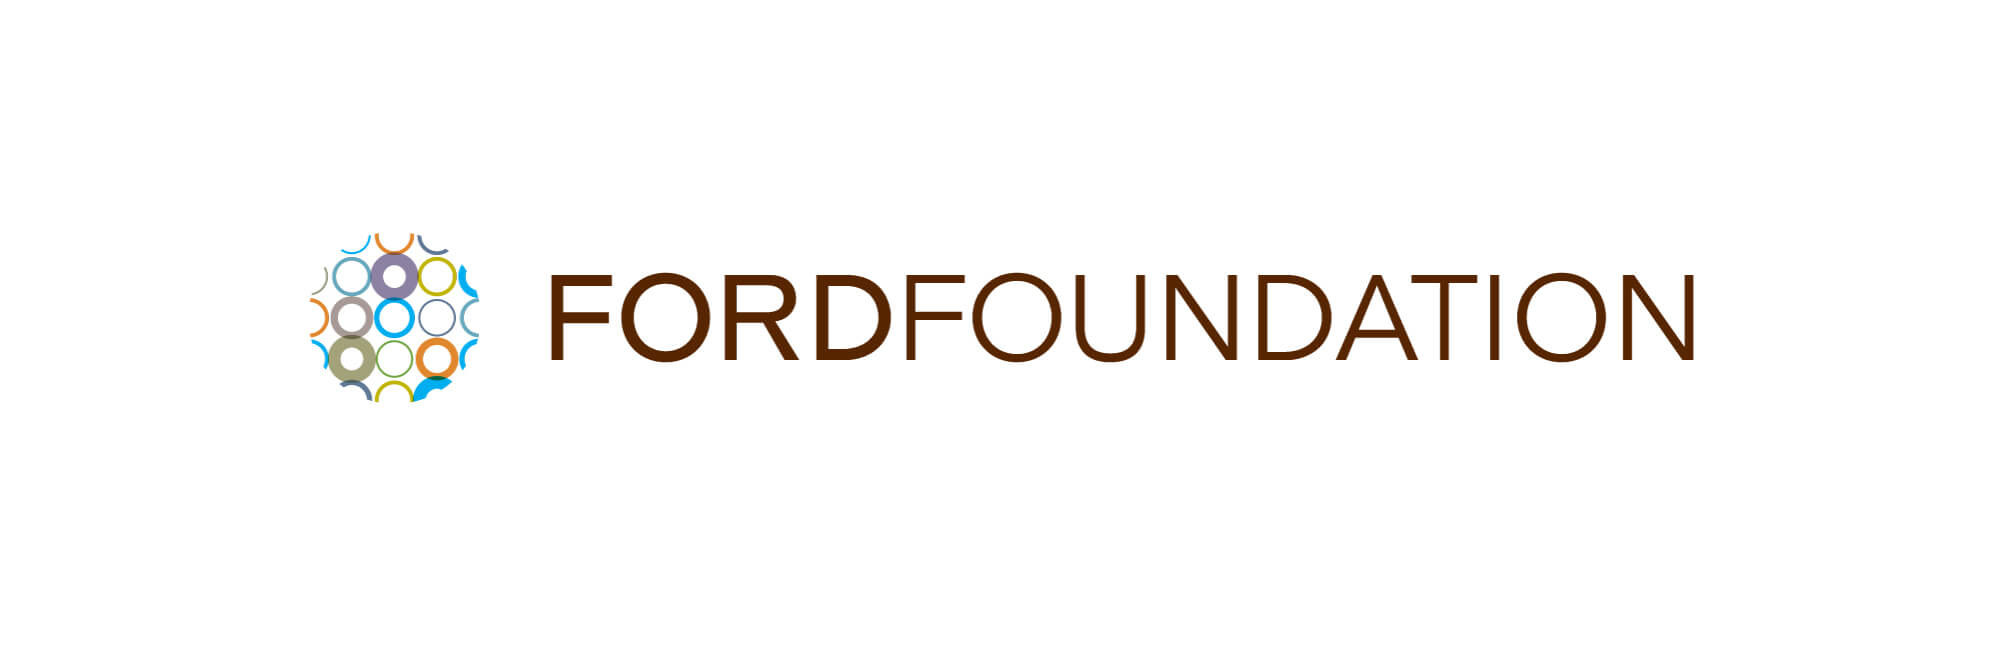 Ford foundation research funding #10